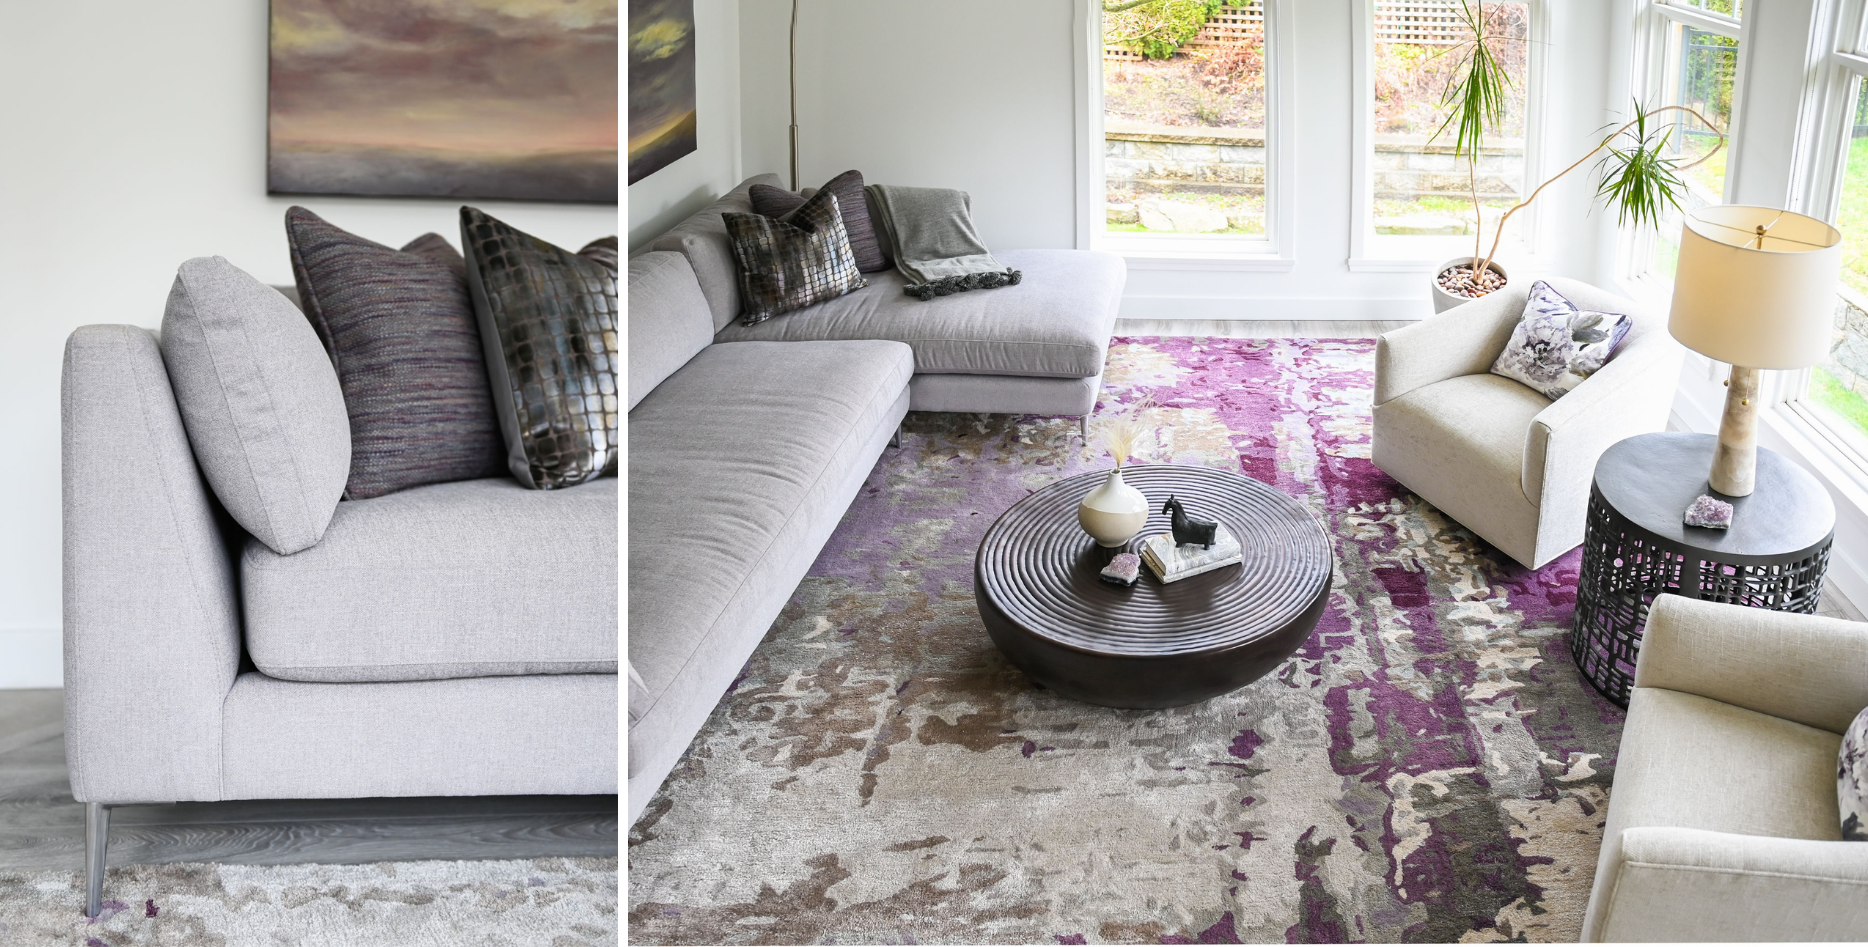 simply-home-decorating-north-vancouver-statement-pieces-gray-sofa-in-living-room-with-rug-with-purple-accents